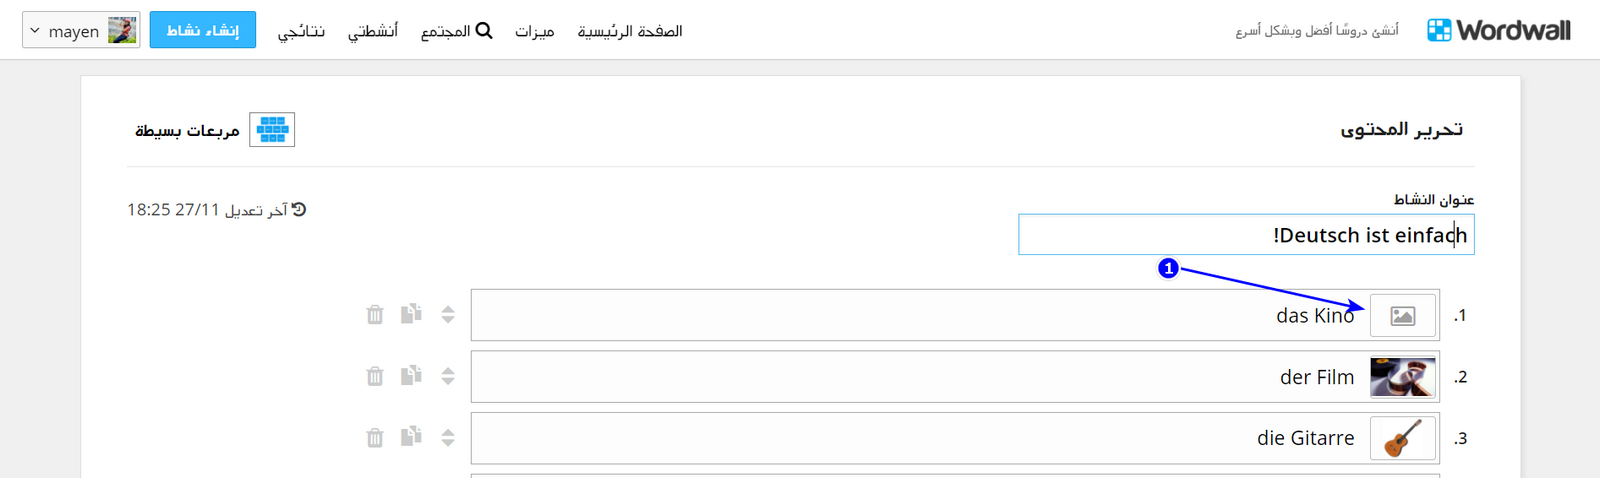 How_to_add_an_image_-_Arabic_4.png